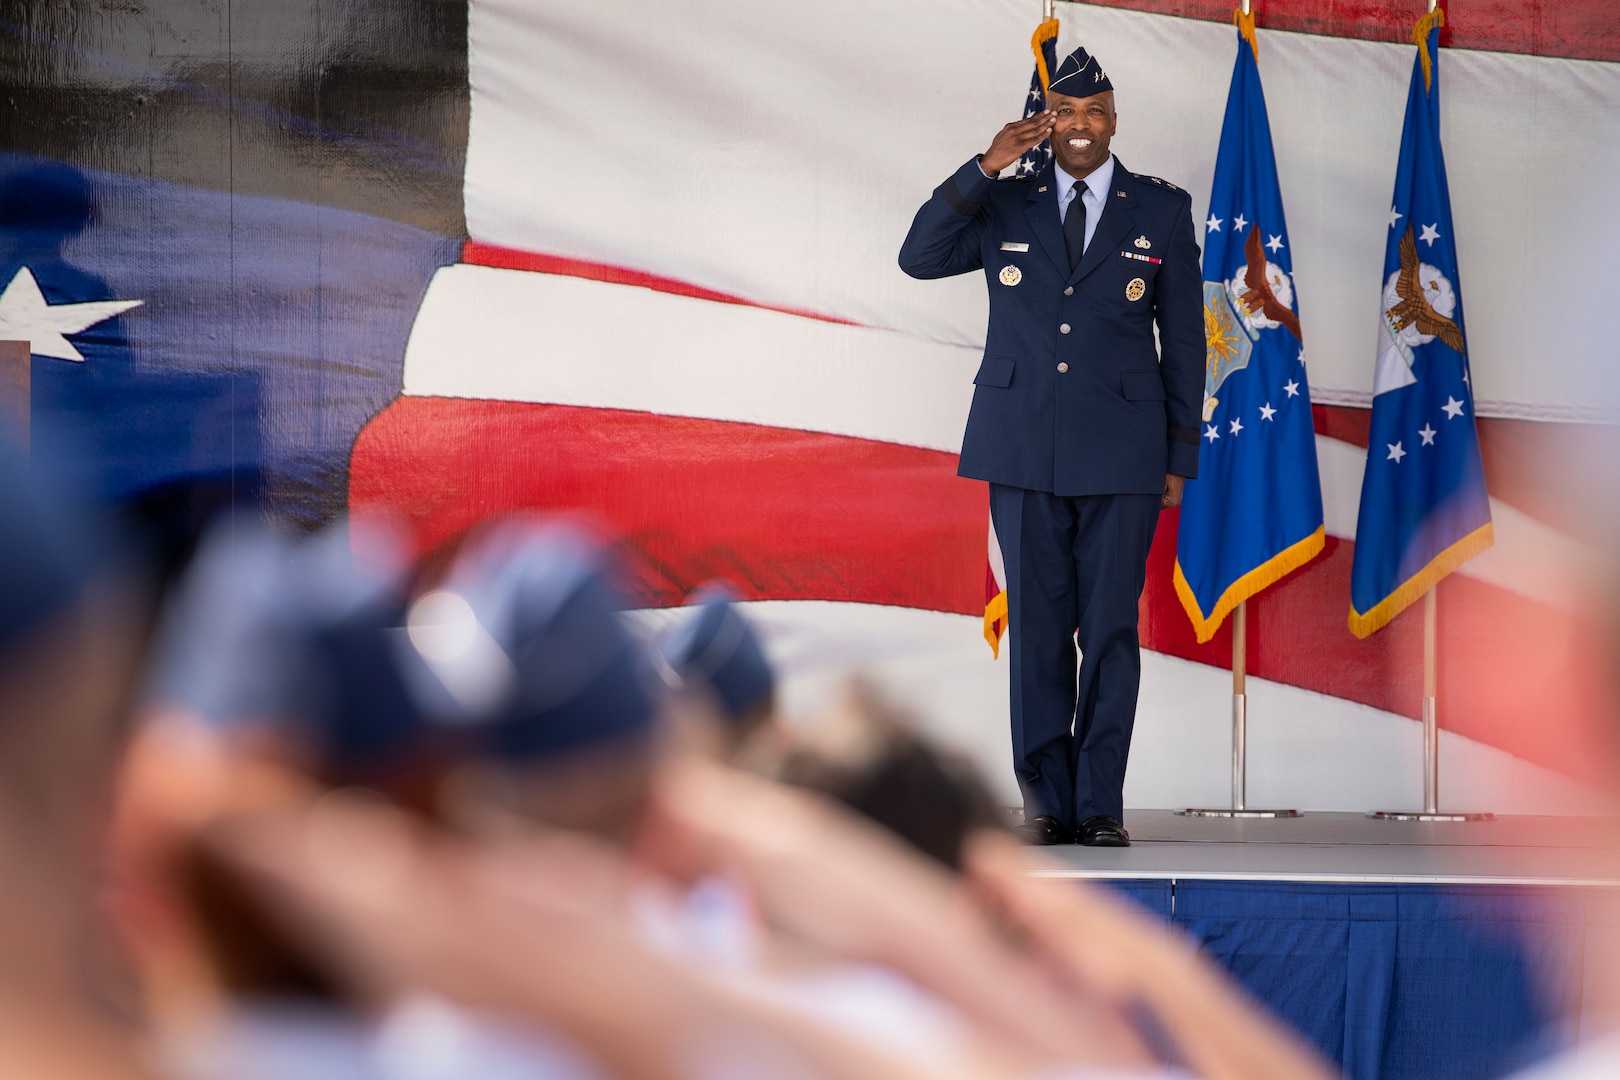 Maj. Gen. Troy Dunn receives his first salute from the members of the Air Force's Personnel Center during a change of command ceremony at Joint Base San Antonio-Randolph, Texas, May 18, 2022.